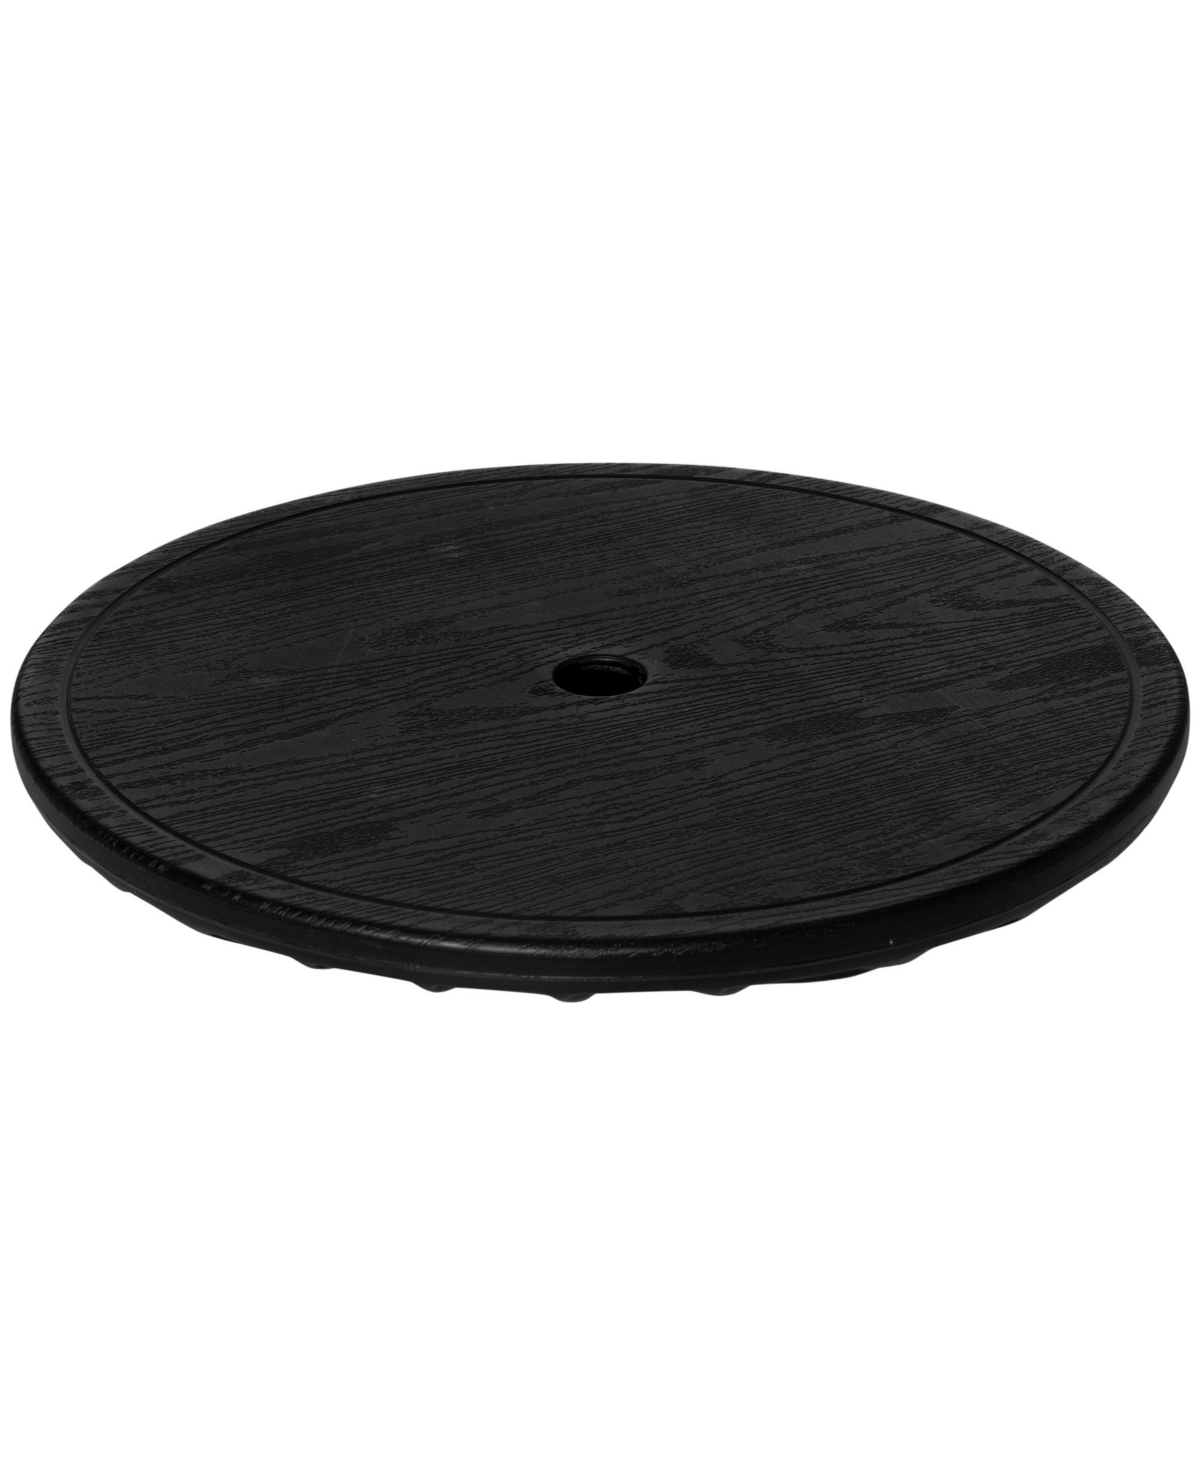 20" Umbrella Table Tray, Easy to Install Table-Top, Round Portable for Swimming Pool, Beach, Patio, Deck, Garden, Black - Black